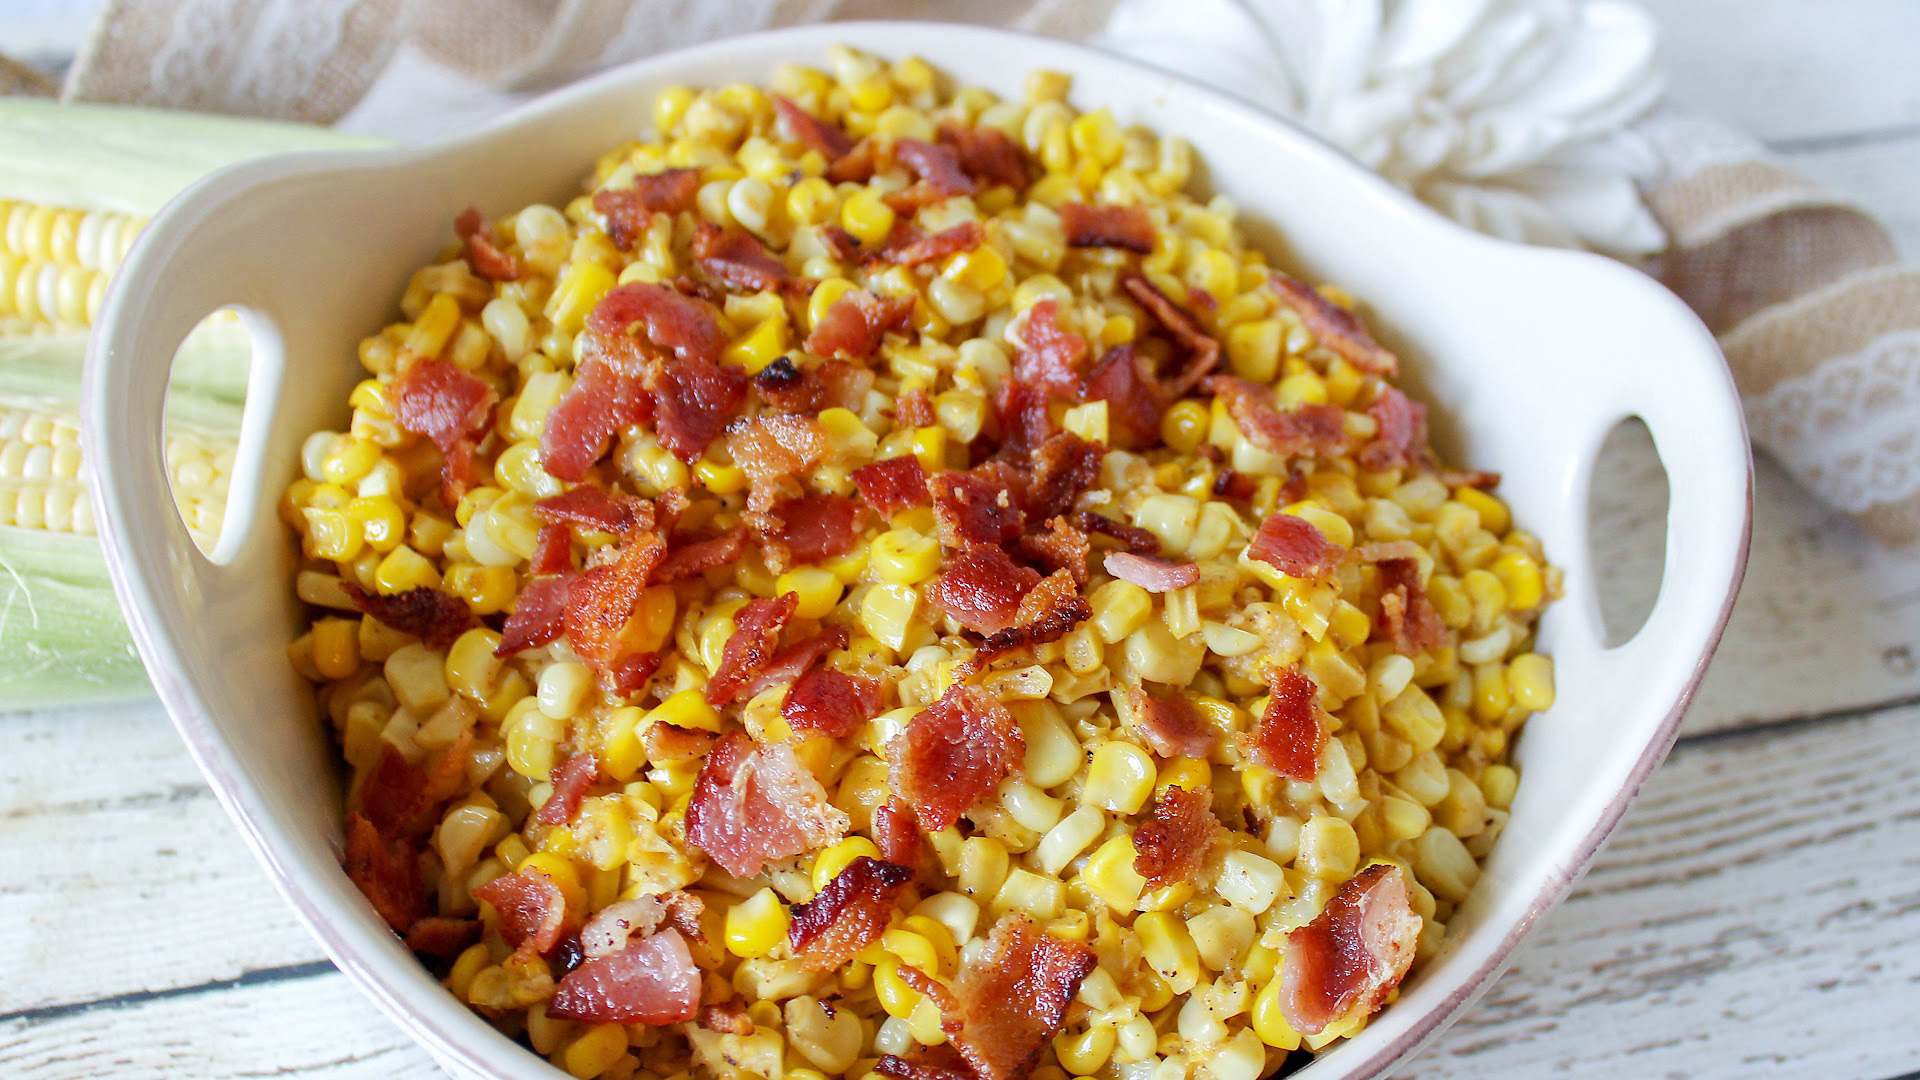 Oh My Goodness, This Fried Corn Recipe Is So Good! Bacon Fried Corn